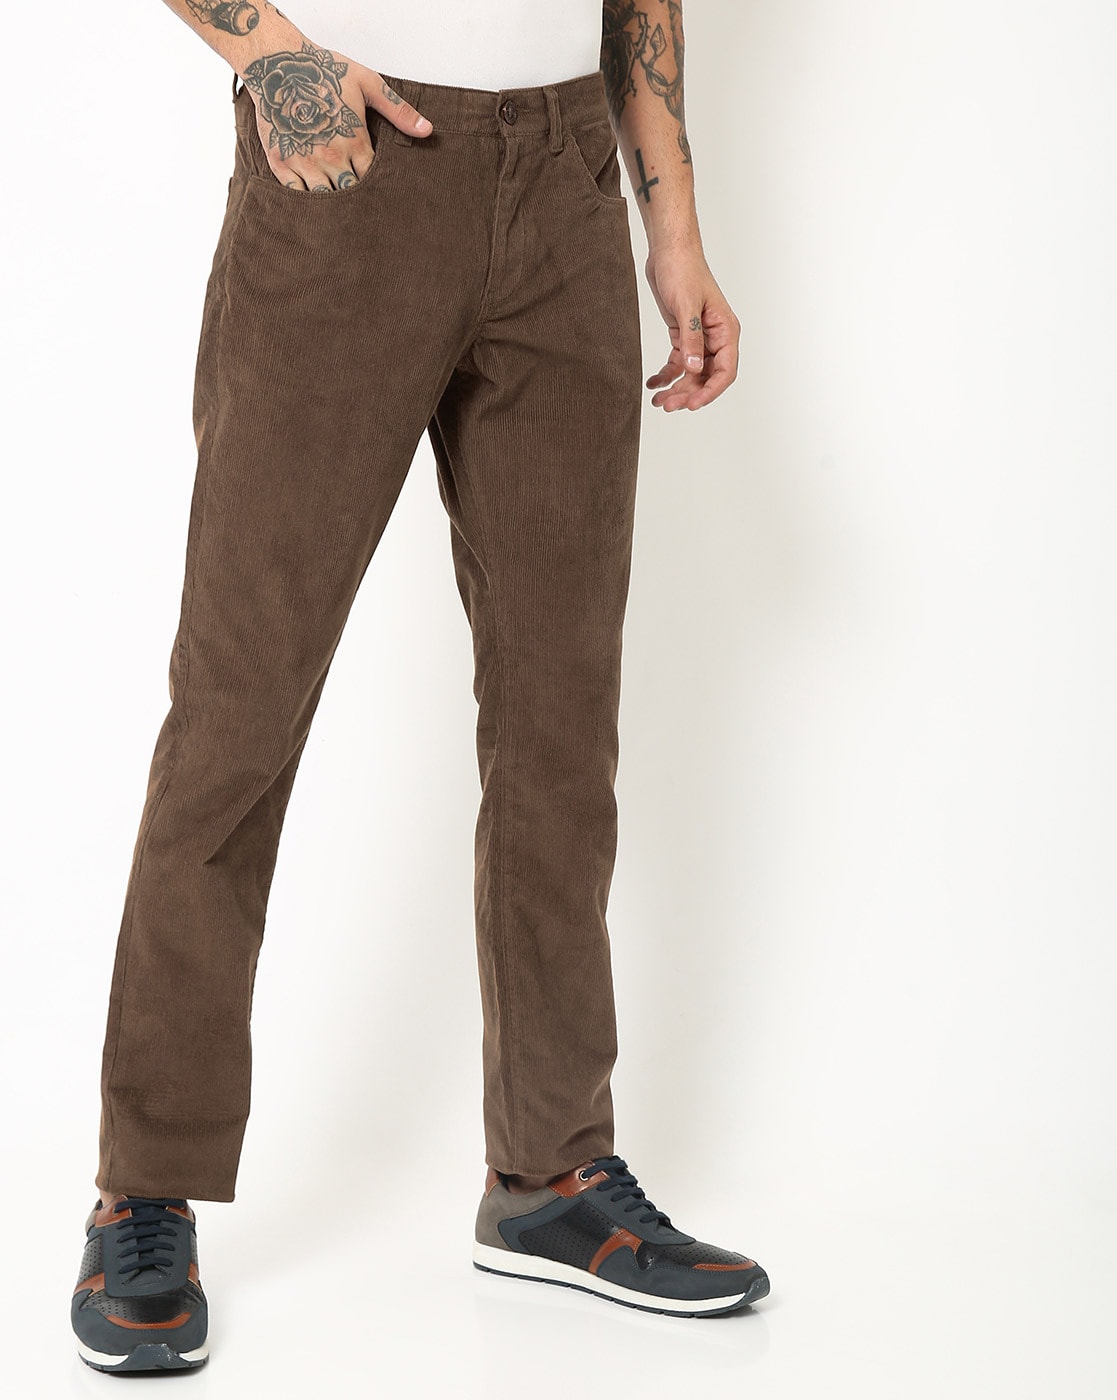 The Best Corduroy Trousers For Men 2023  FashionBeans